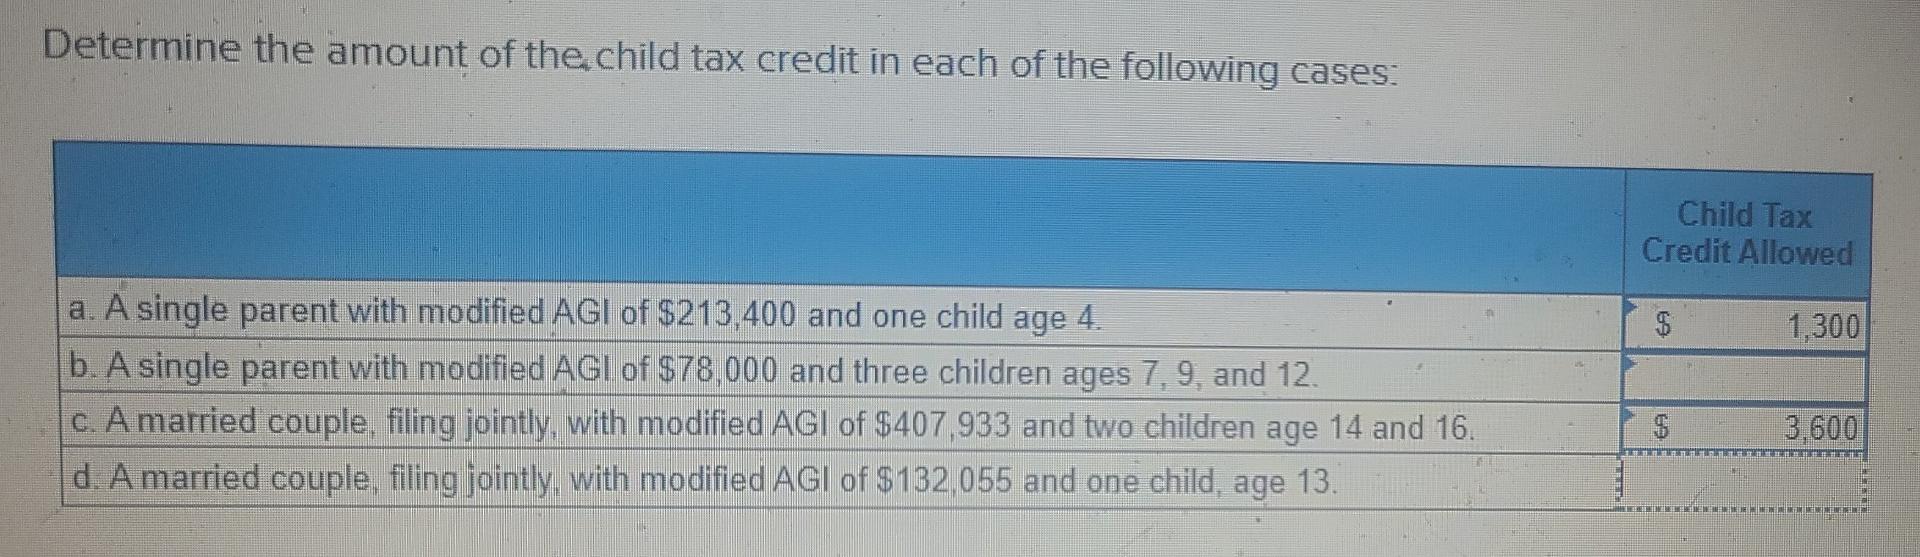 Solved Determine the amount of the child tax credit in each